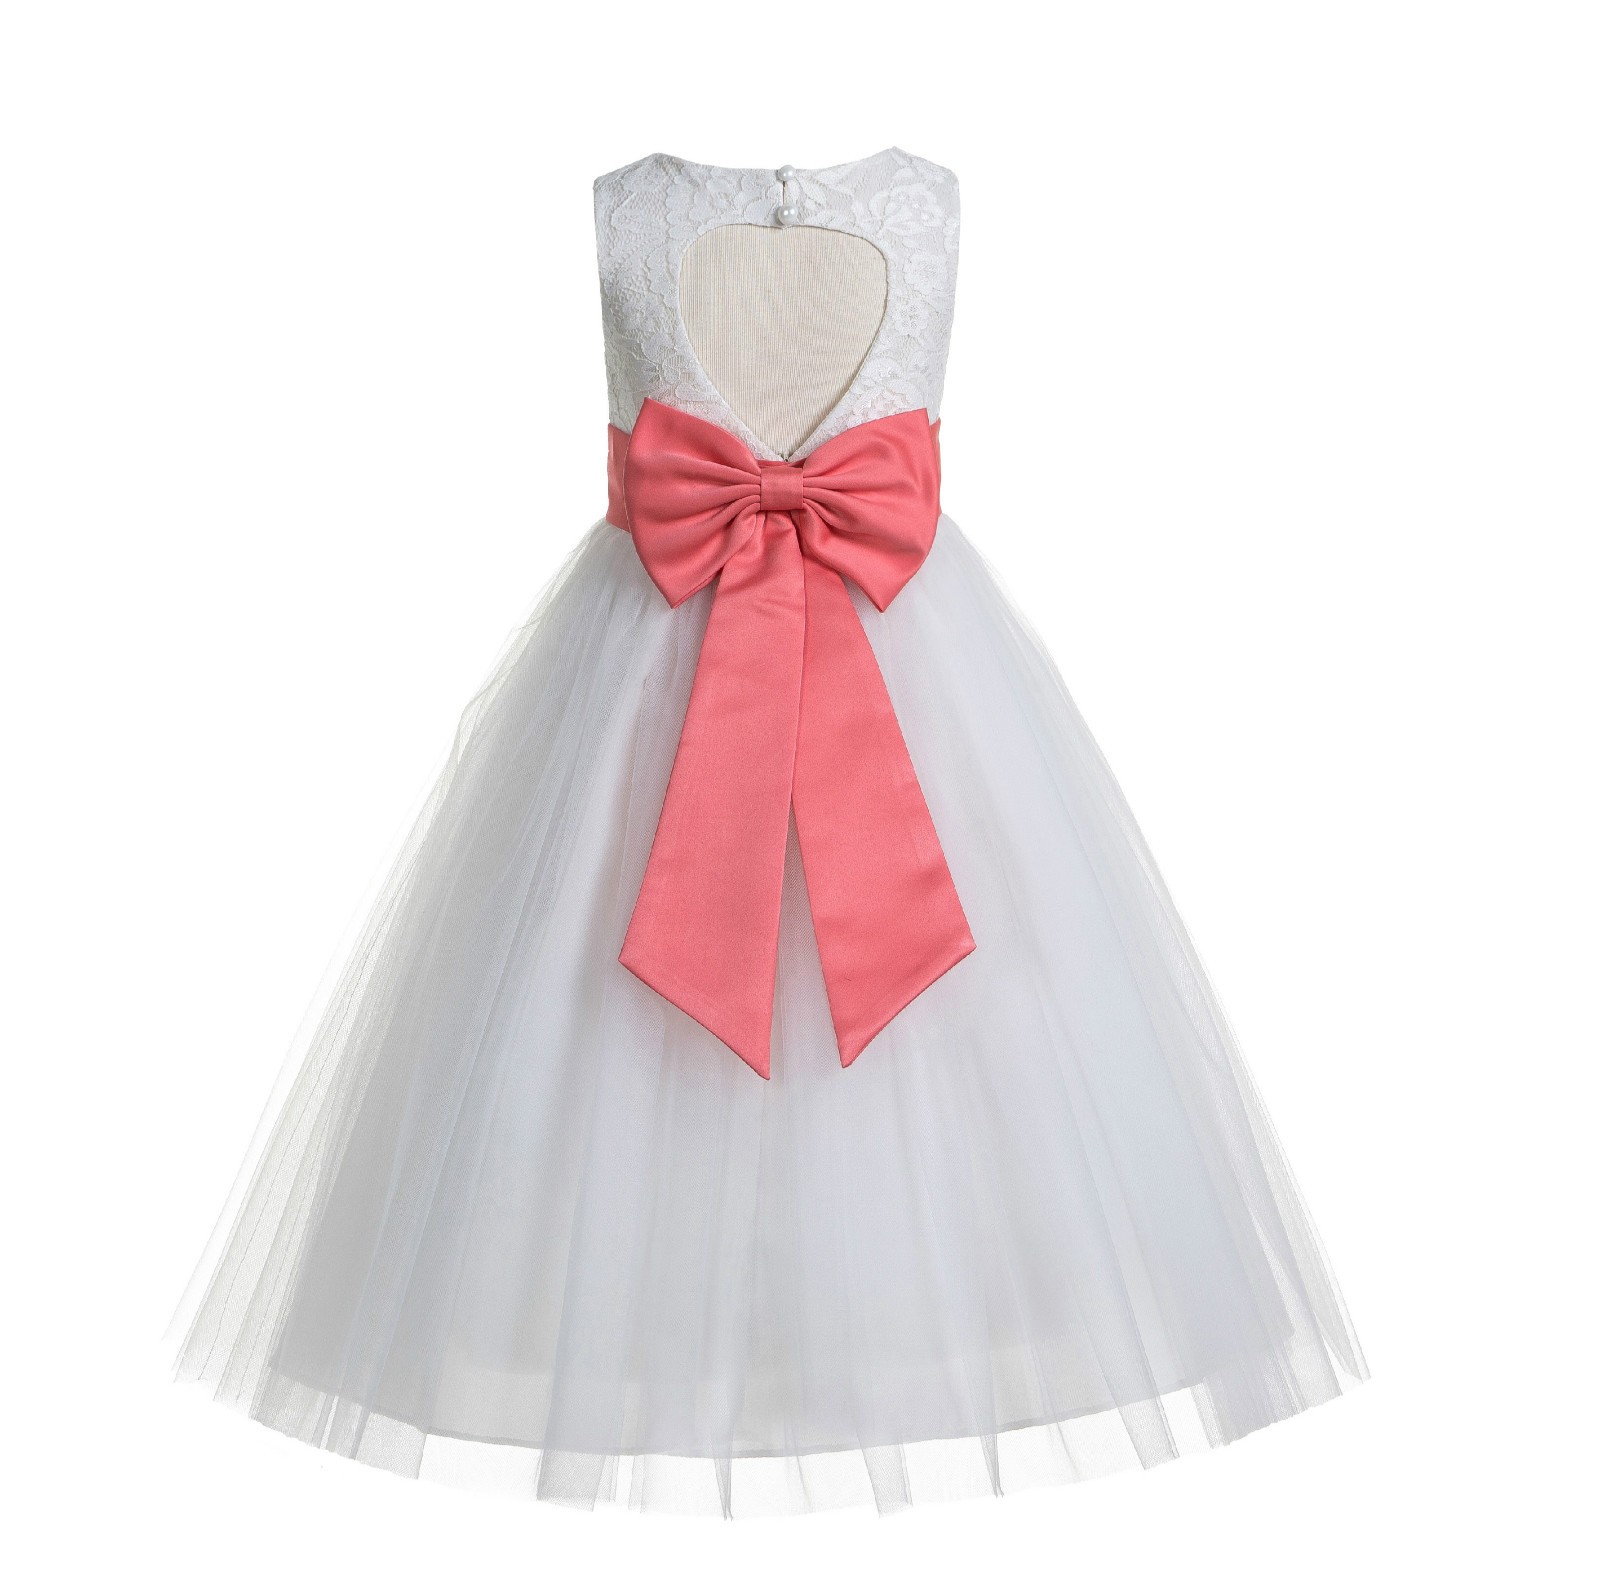 Ivory / Coral Floral Lace Heart Cutout Flower Girl Dress with Flower 172T